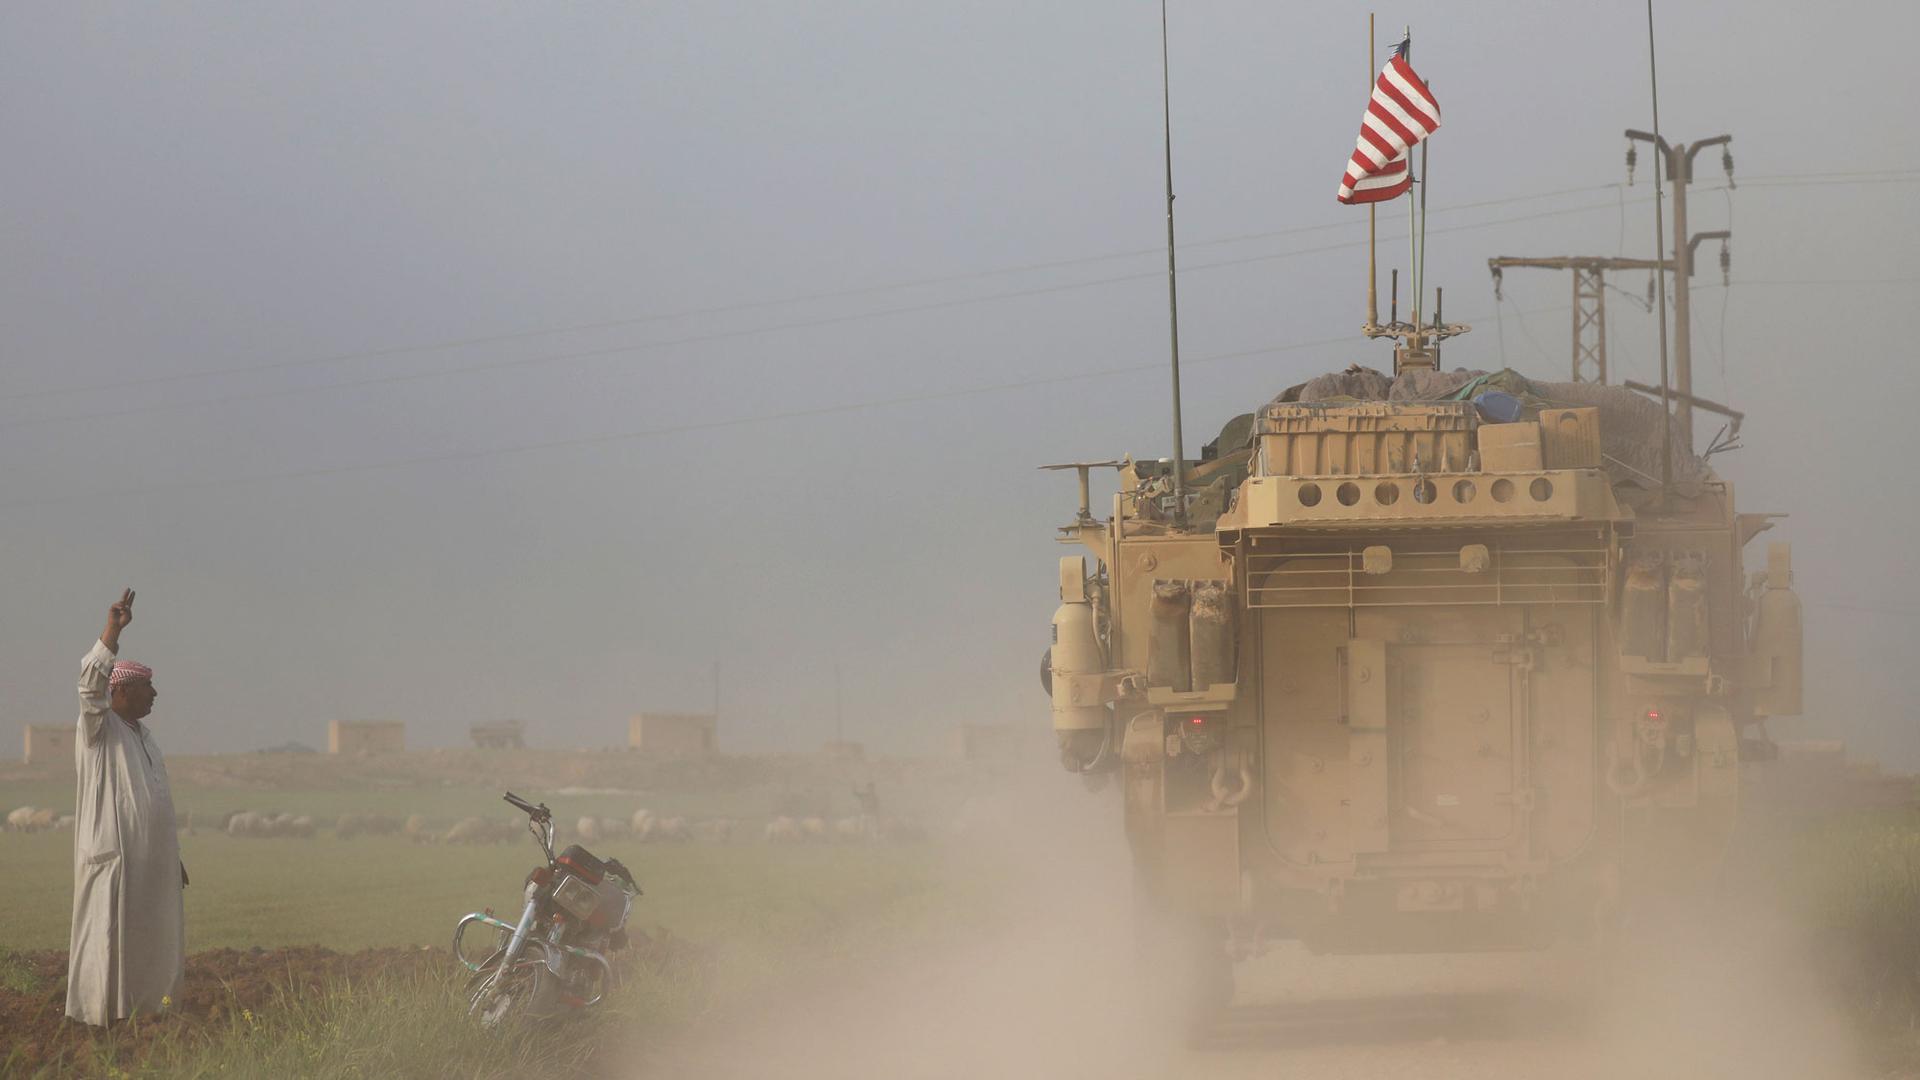 A man is shown waving to a large MRAP US military vehicle with a dust cloud coming up from the truck.